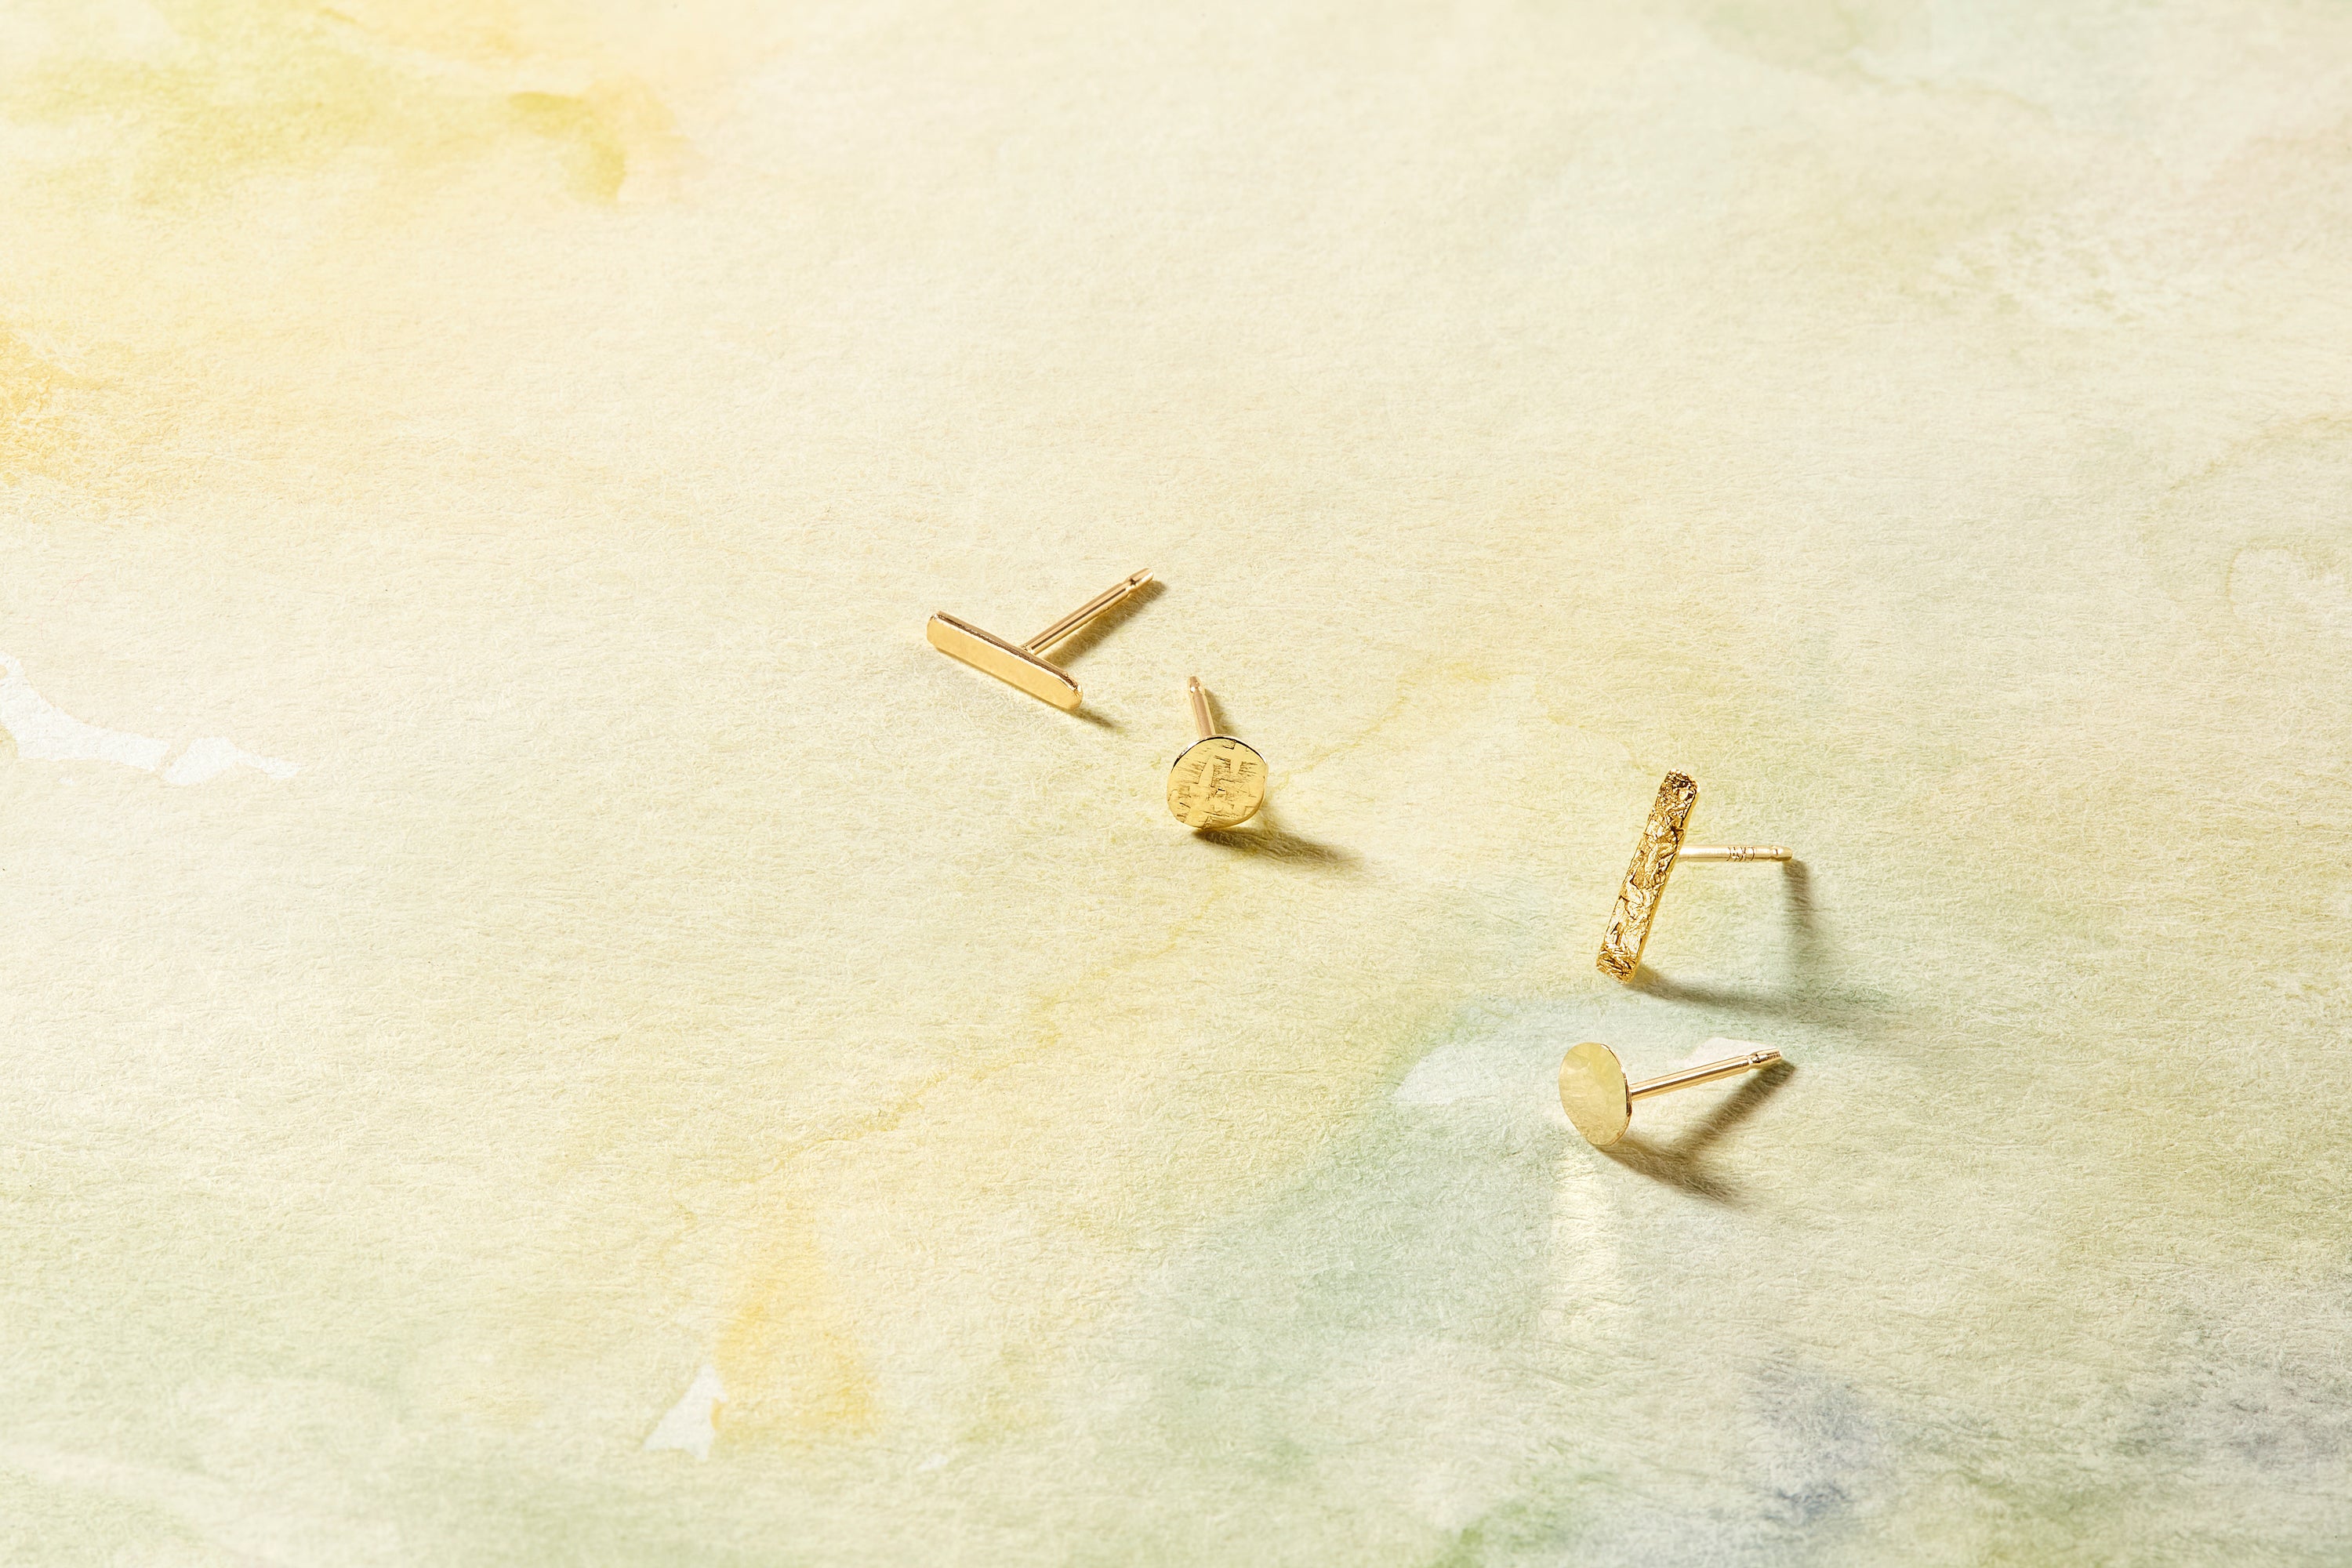 The Dot Stud, modern simplicity in 14k gold with your choice of classic hammered textured or nugget texture